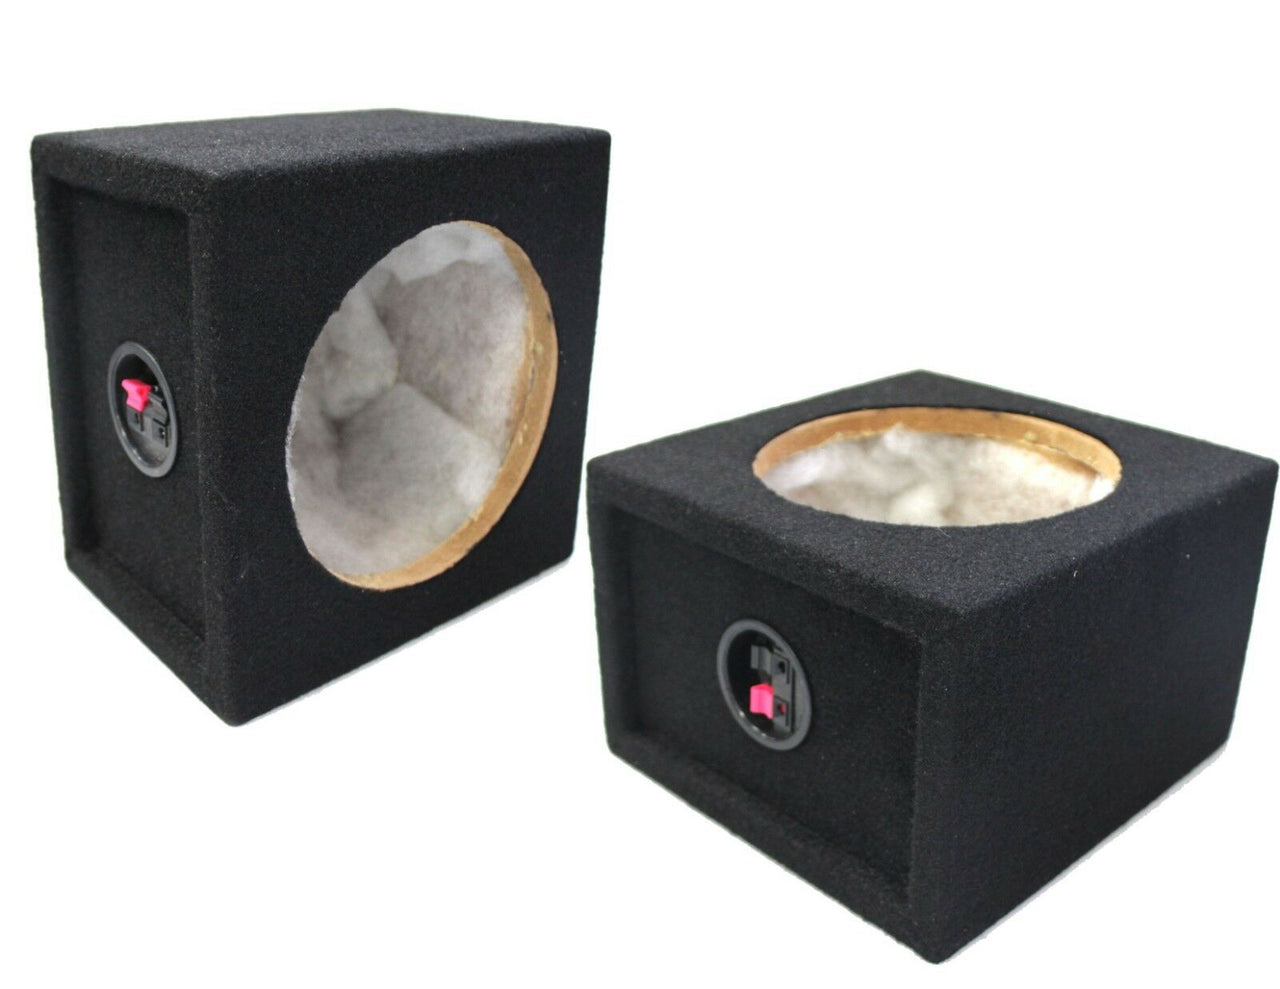 Absolute USA SQ6.5PKB 6.5" Square Empty Box Speakers, Set of Two (Black)